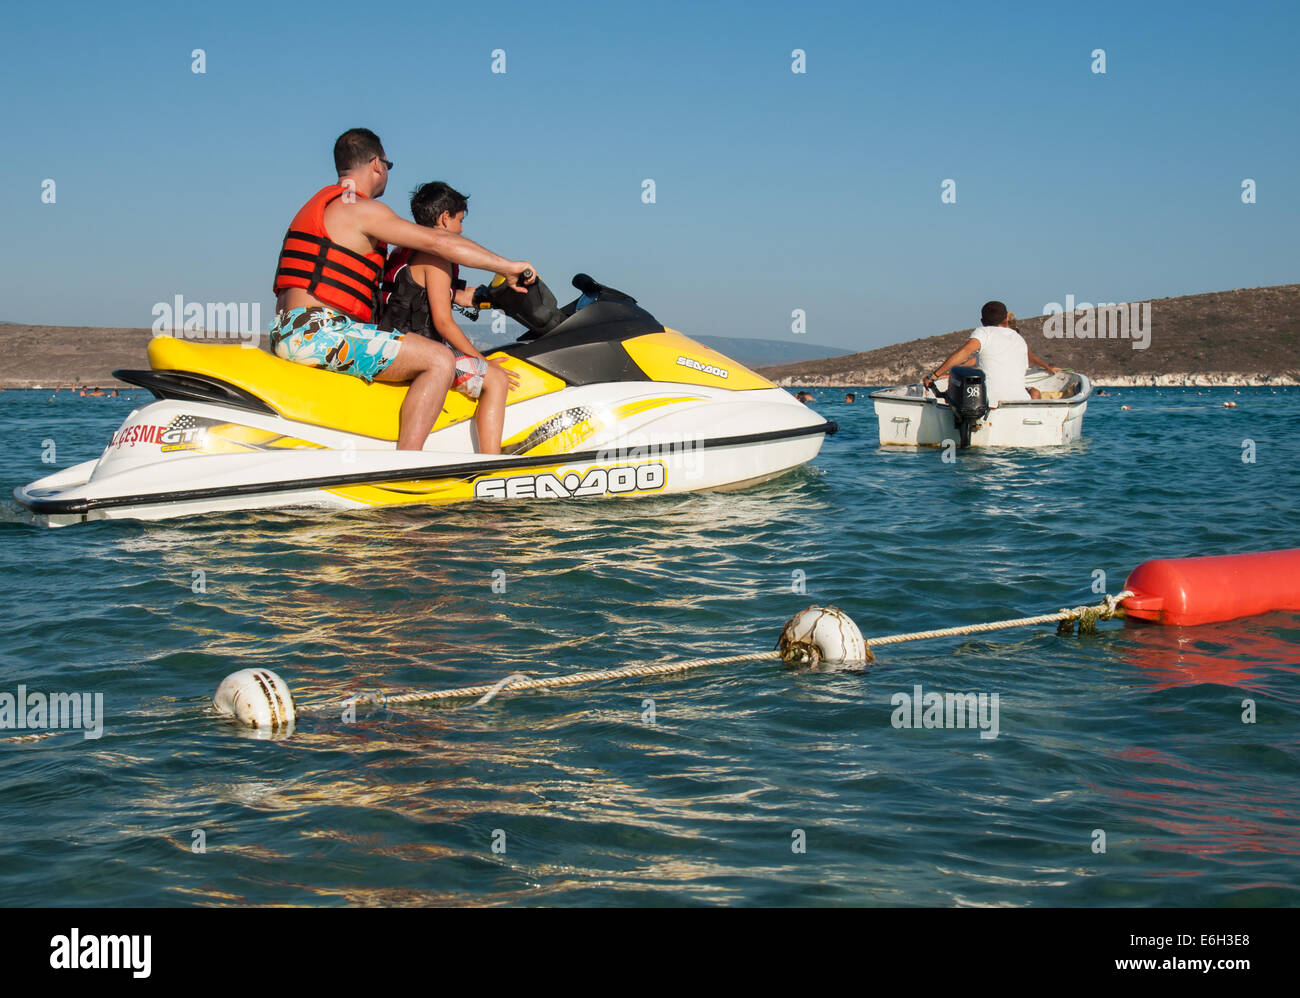 tourists on jet ski passing through boating lane between roped off swimming areas on the cesme coast Stock Photo